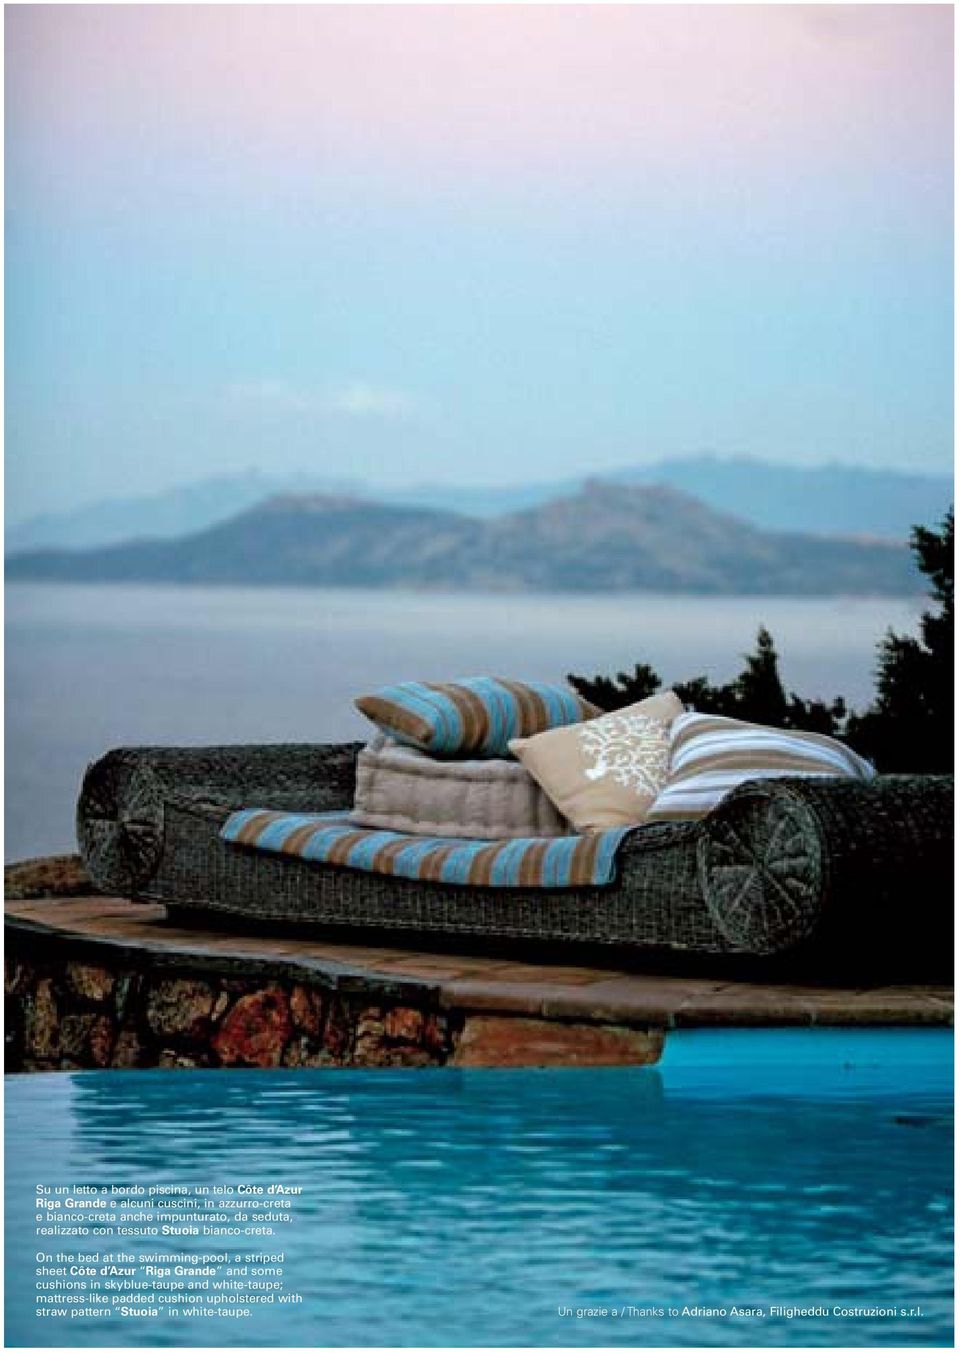 On the bed at the swimming-pool, a striped sheet Côte d Azur Riga Grande and some cushions in skyblue-taupe and